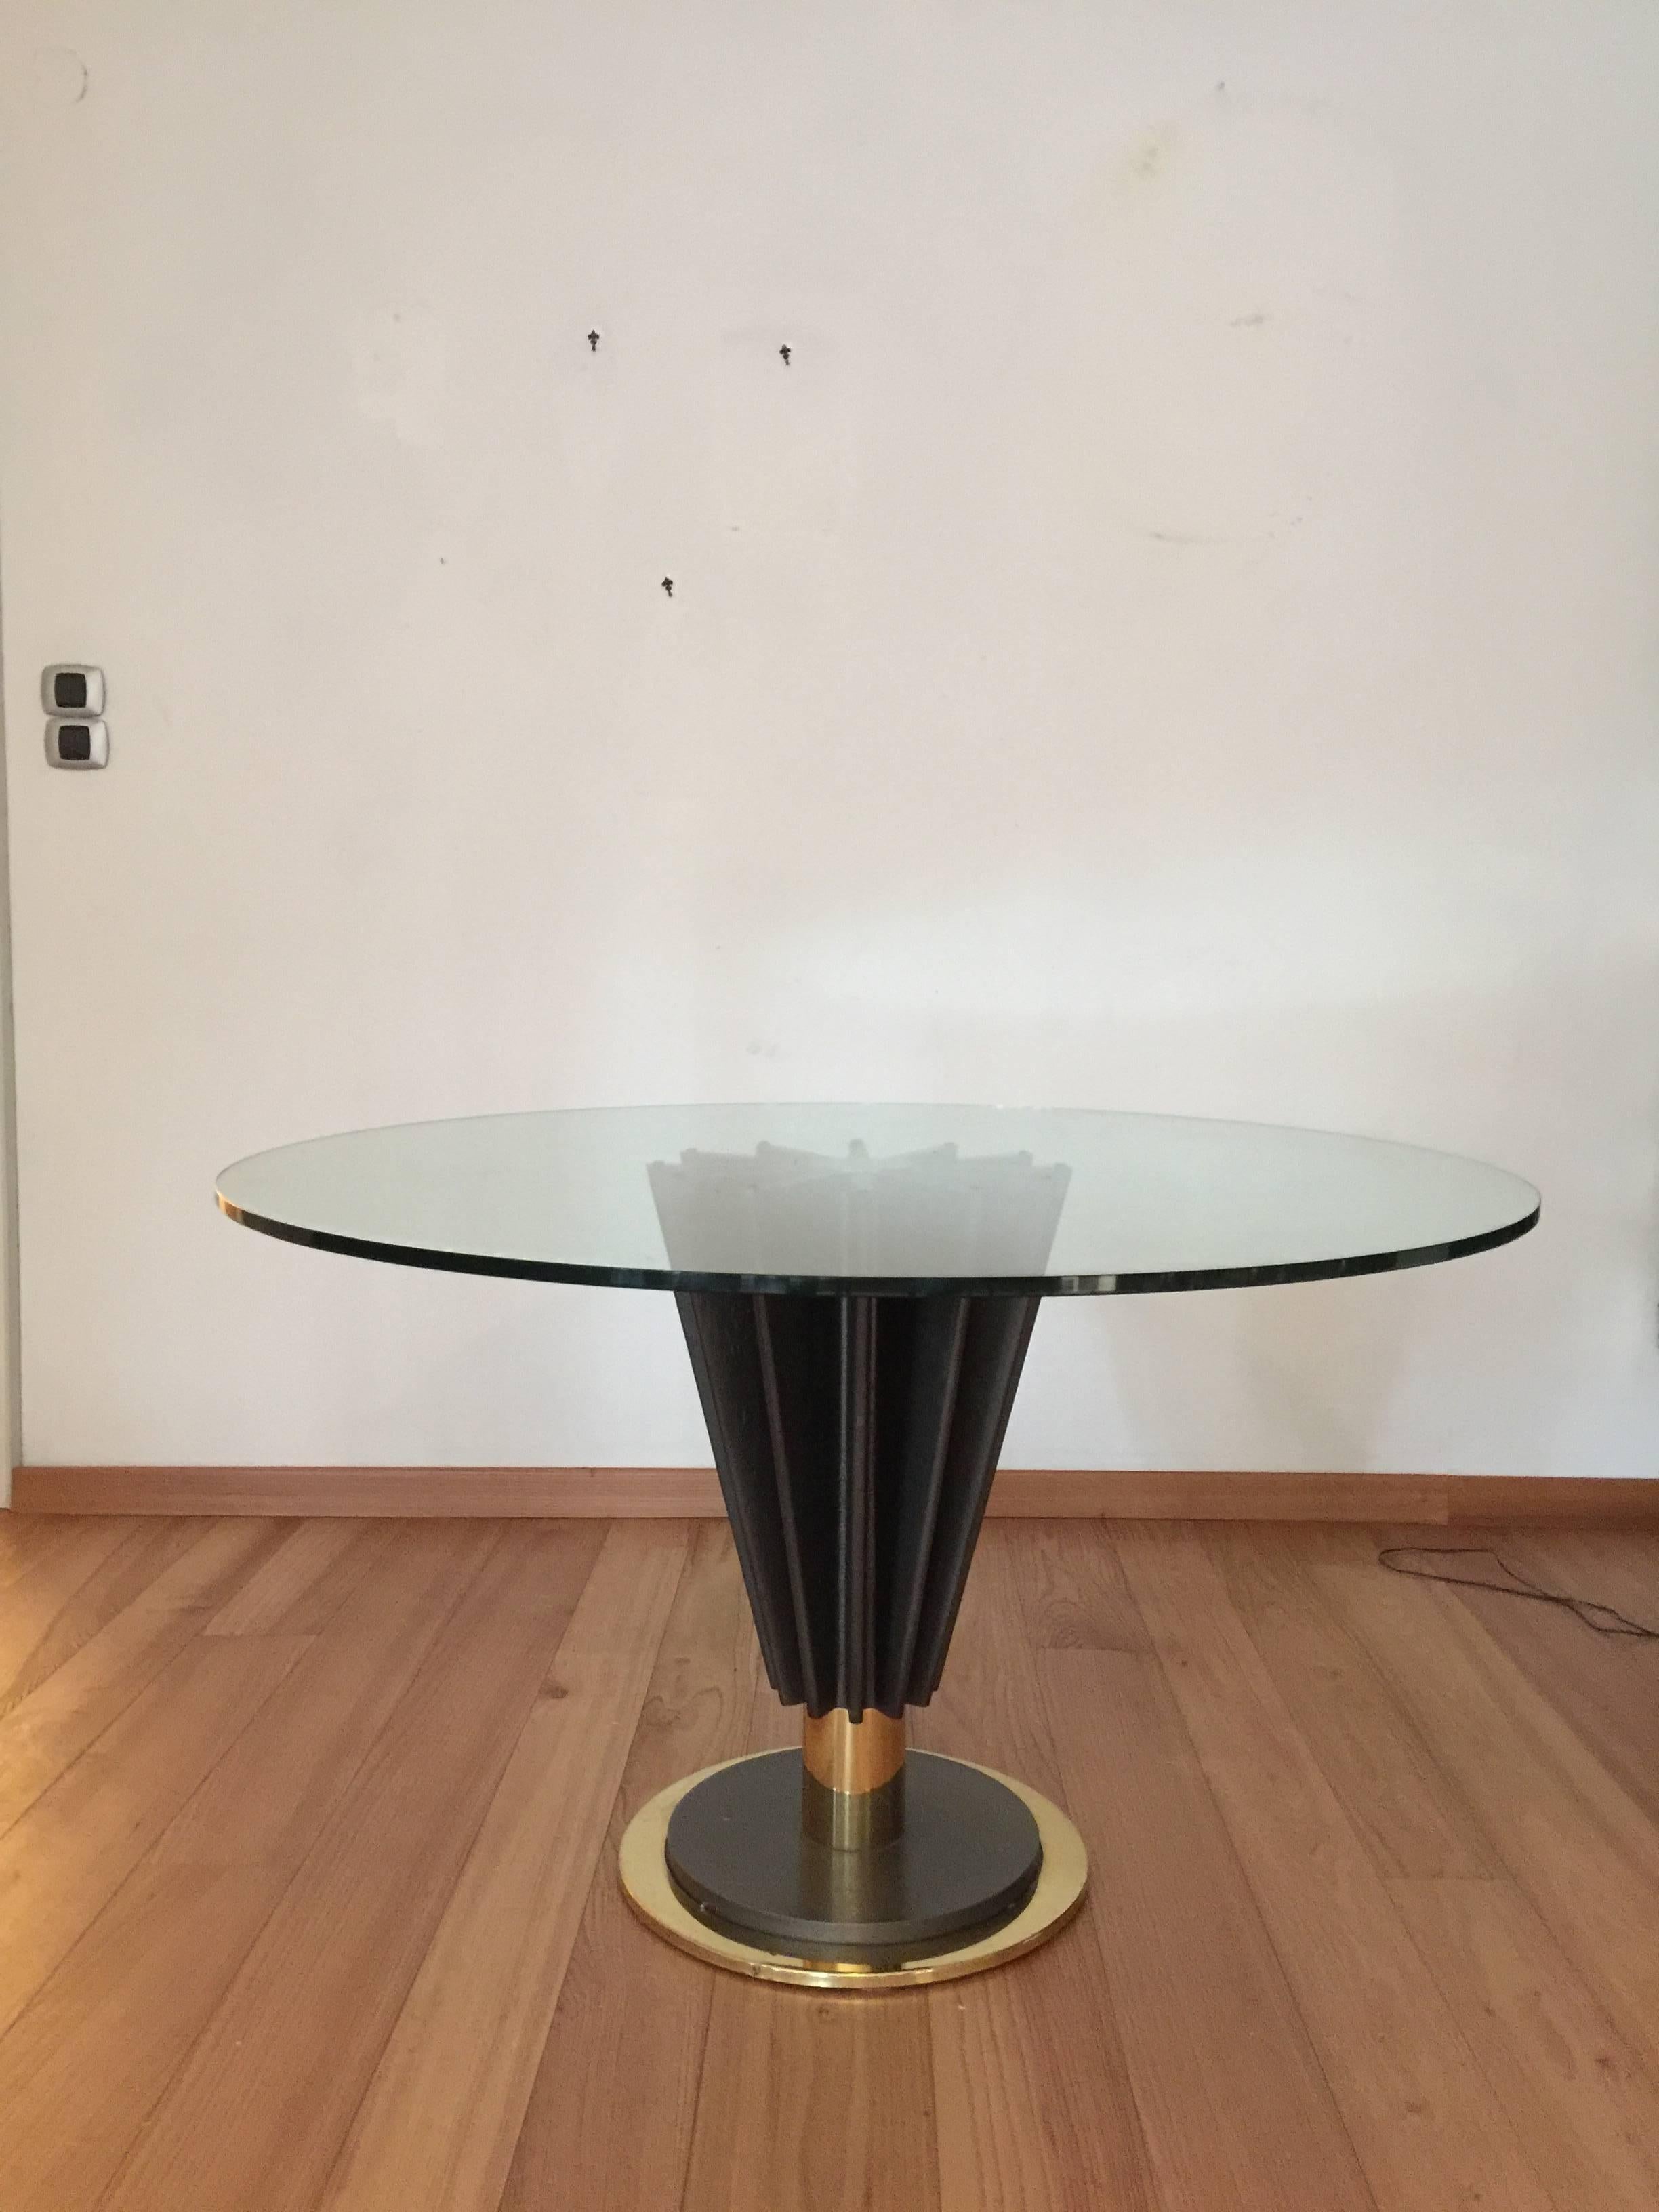 Masterpiece table and chairs designed by Pierre Cardin in the 1970s and hand made in Italy. The table base is made from cast iron and polished brass, the chairs are made form natural and lacquered cherrywood, brass and leather.
Both table and